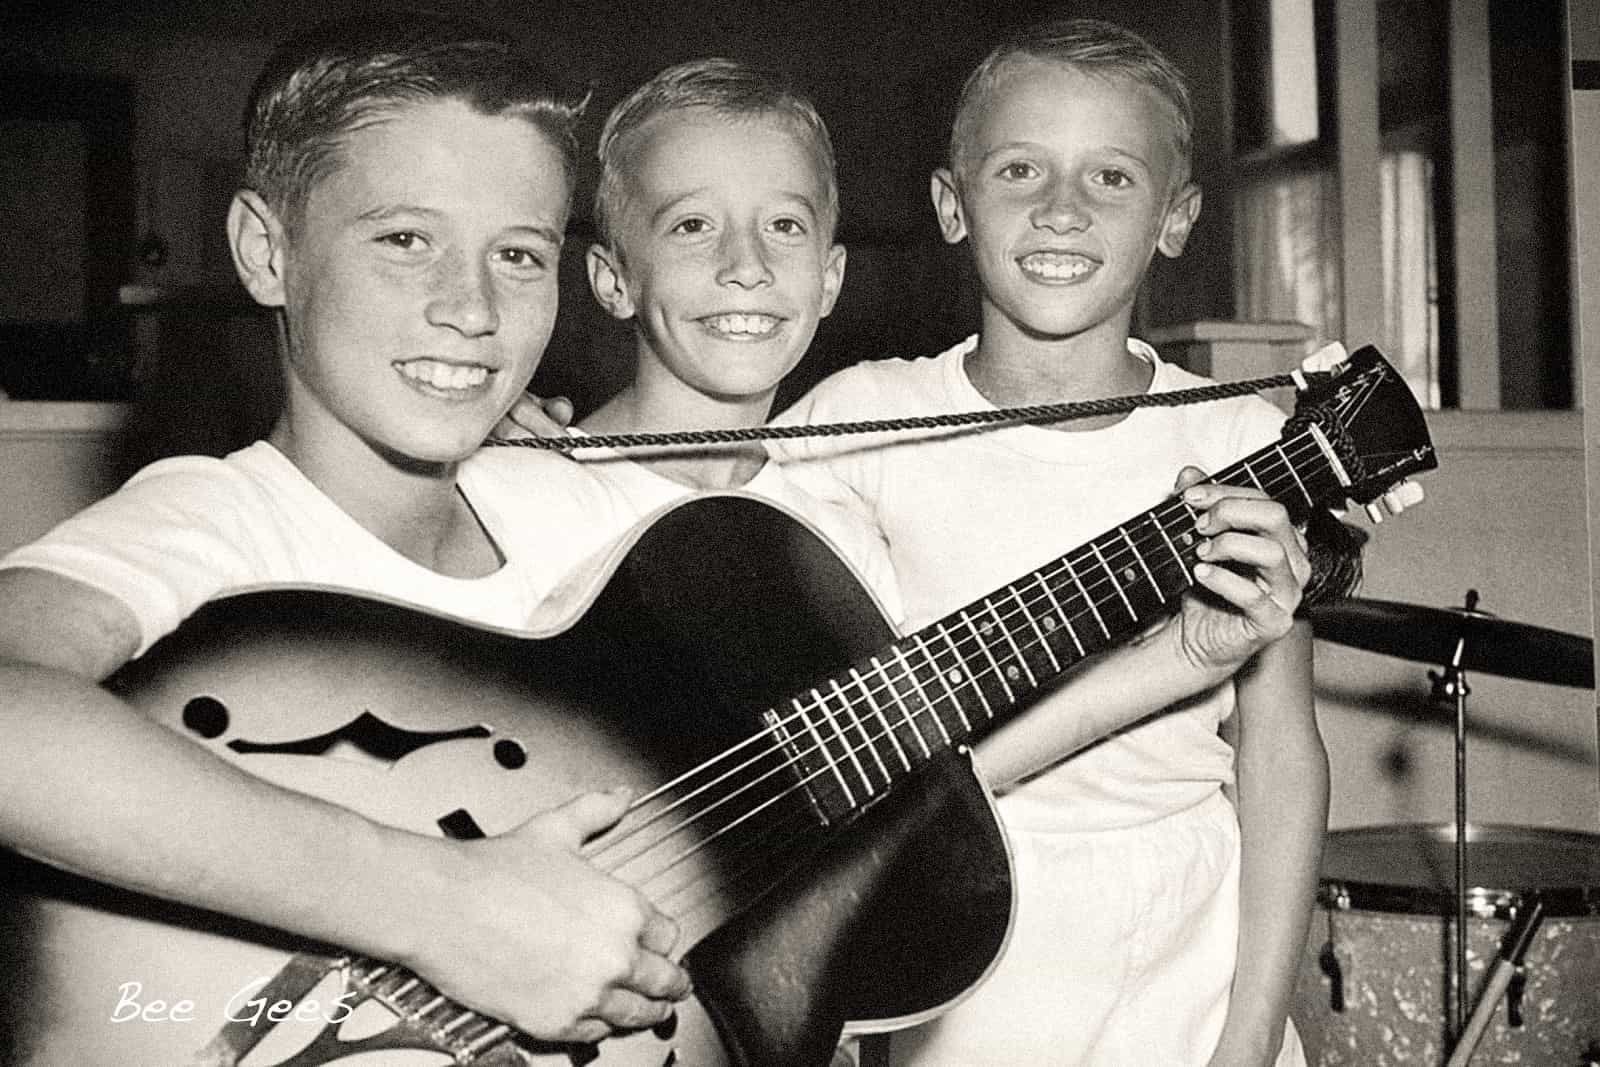 The young Gibb brothers lived on Cribb Island before they became the Bee Gees | Lost Island remembered